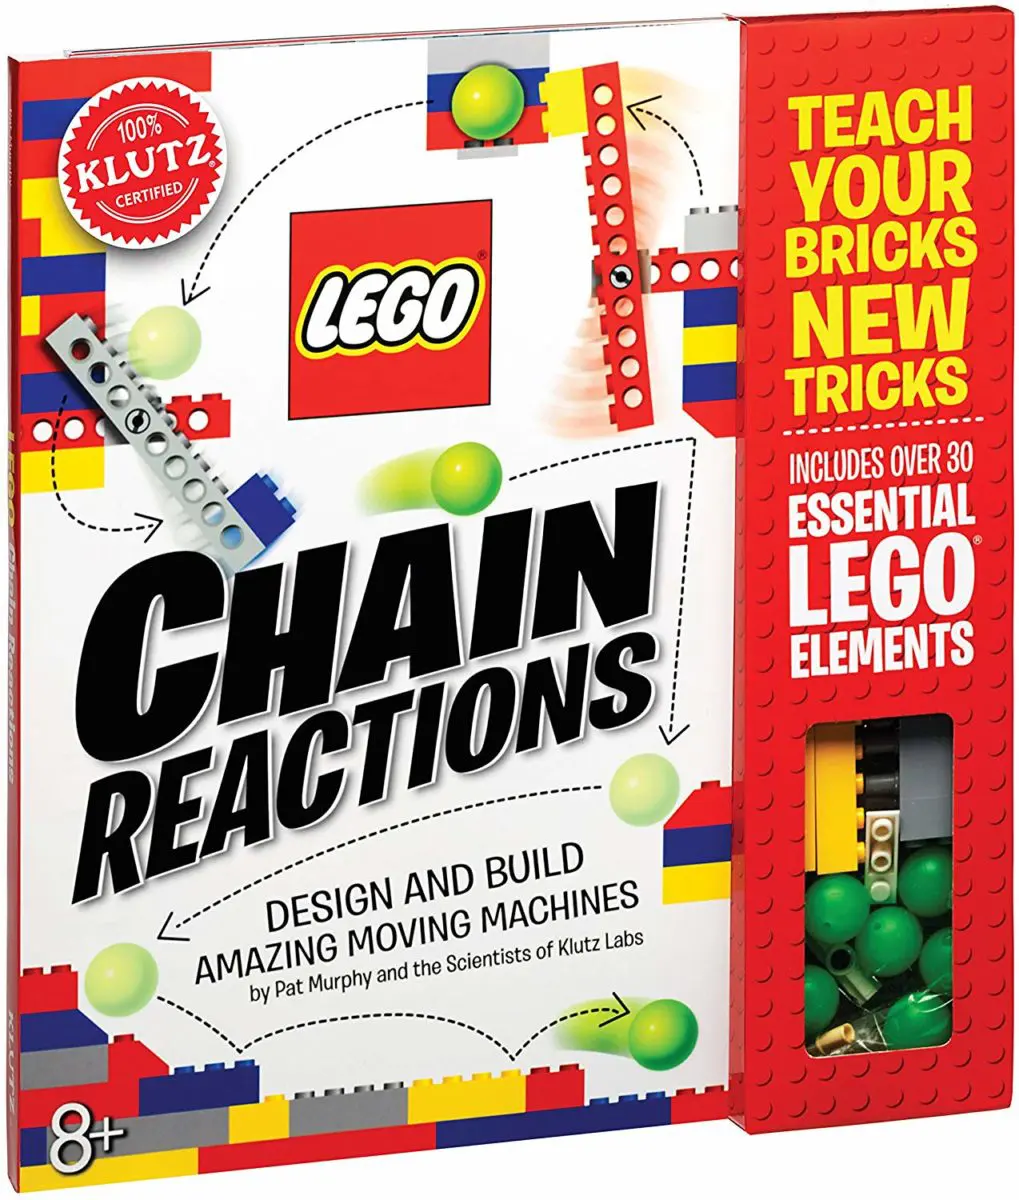 Klutz Lego Chain Reactions Science and Building Kit - Top Toys and Gifts for Seven Year Old Boys 1